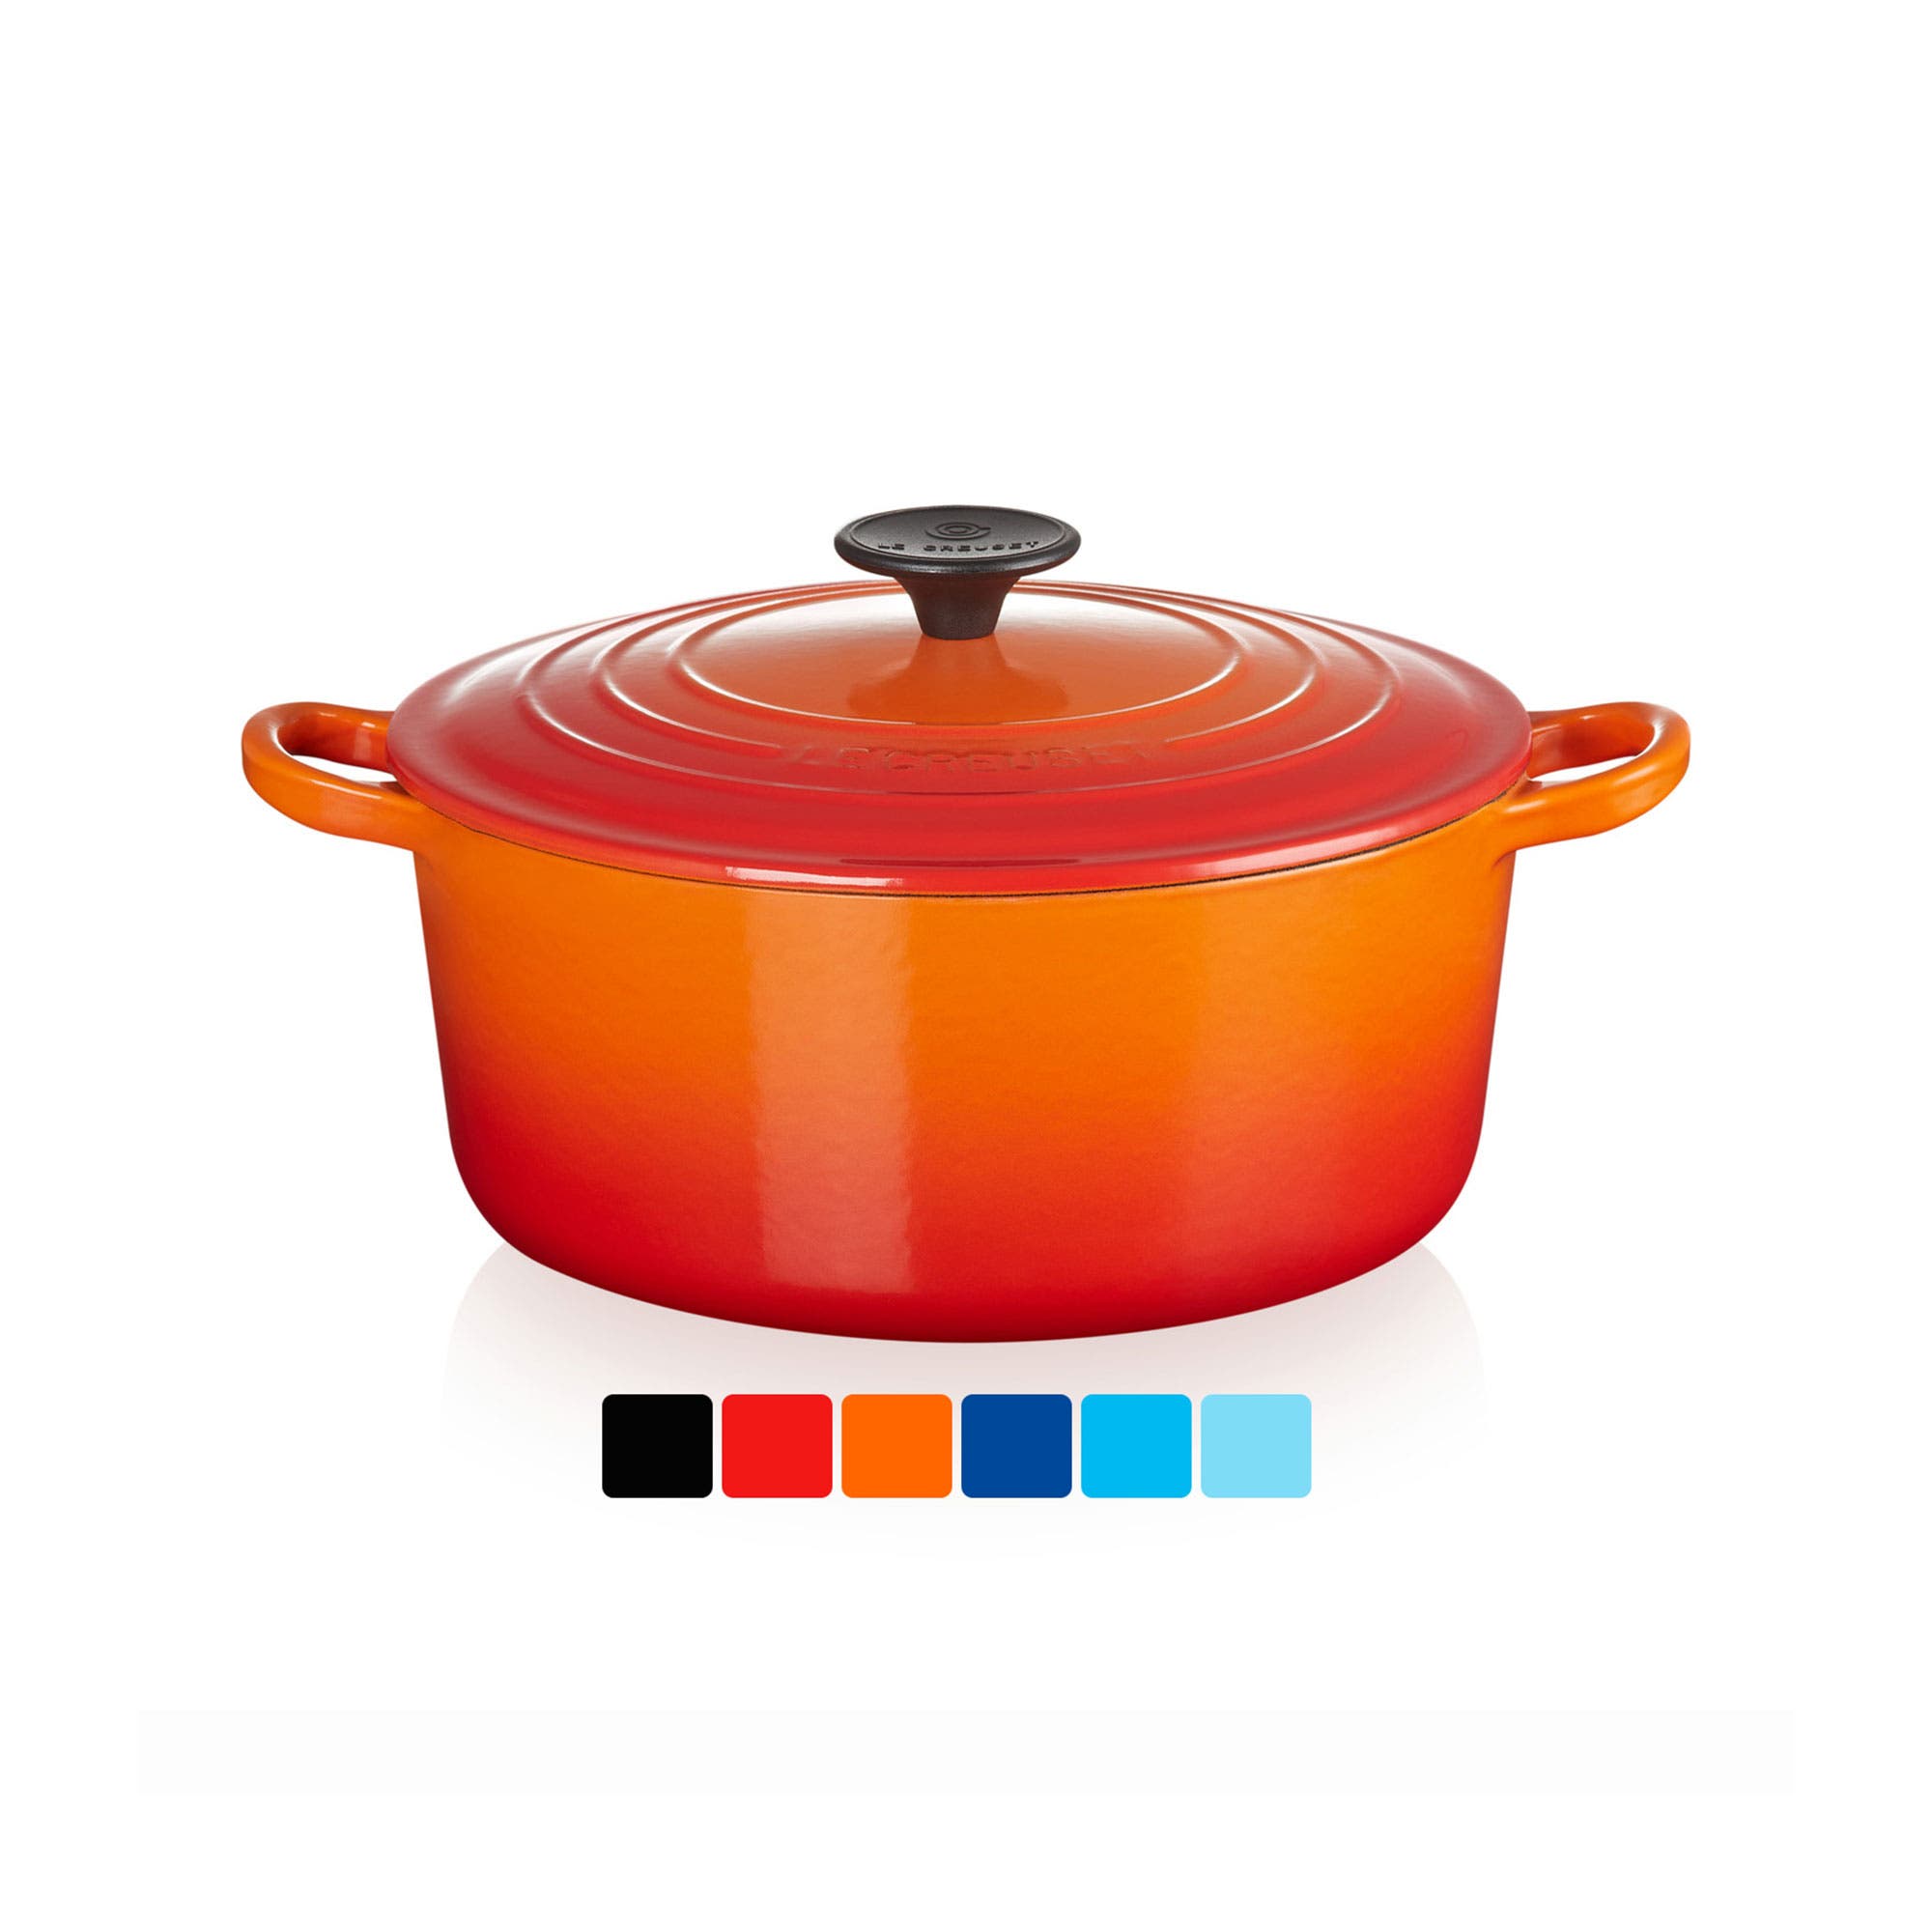 Le Creuset OUTLET in Germany • Sale up to 70% off